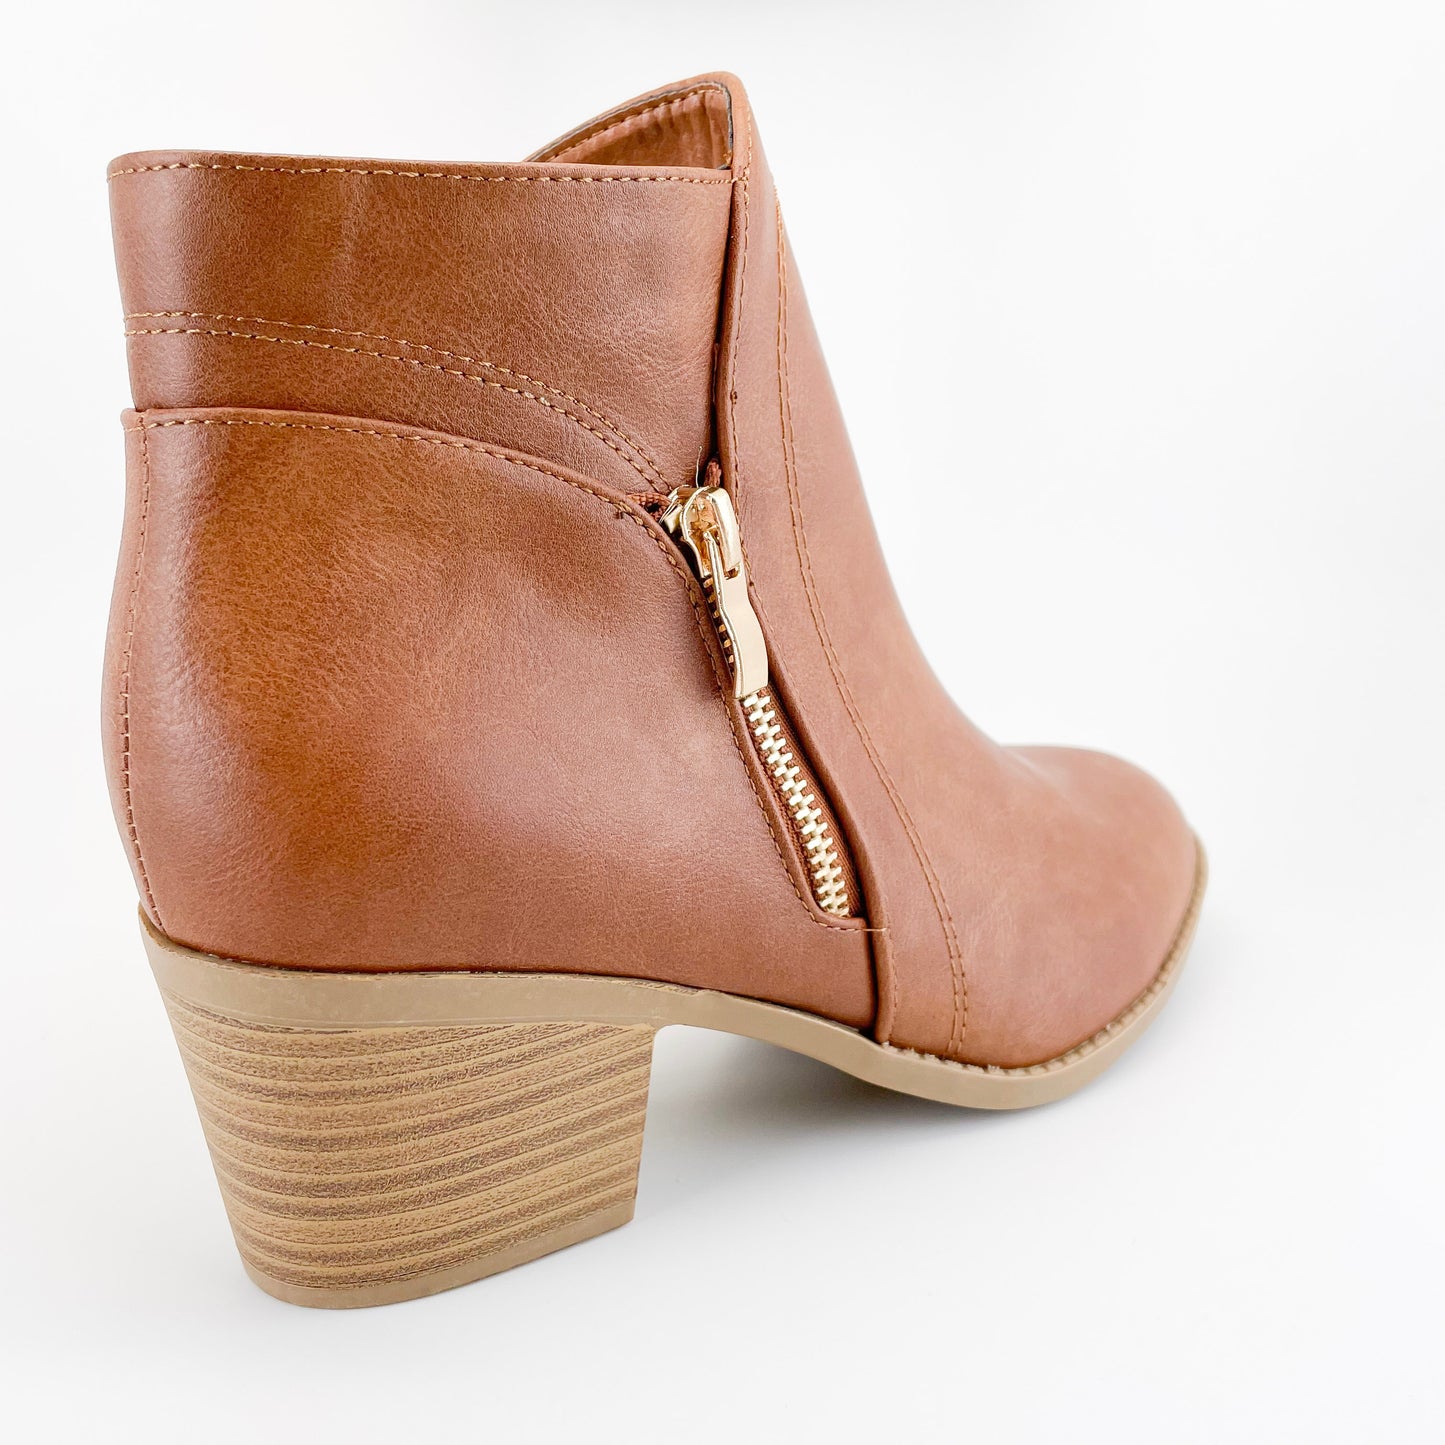 "Aster" Zipper Ankle Boots